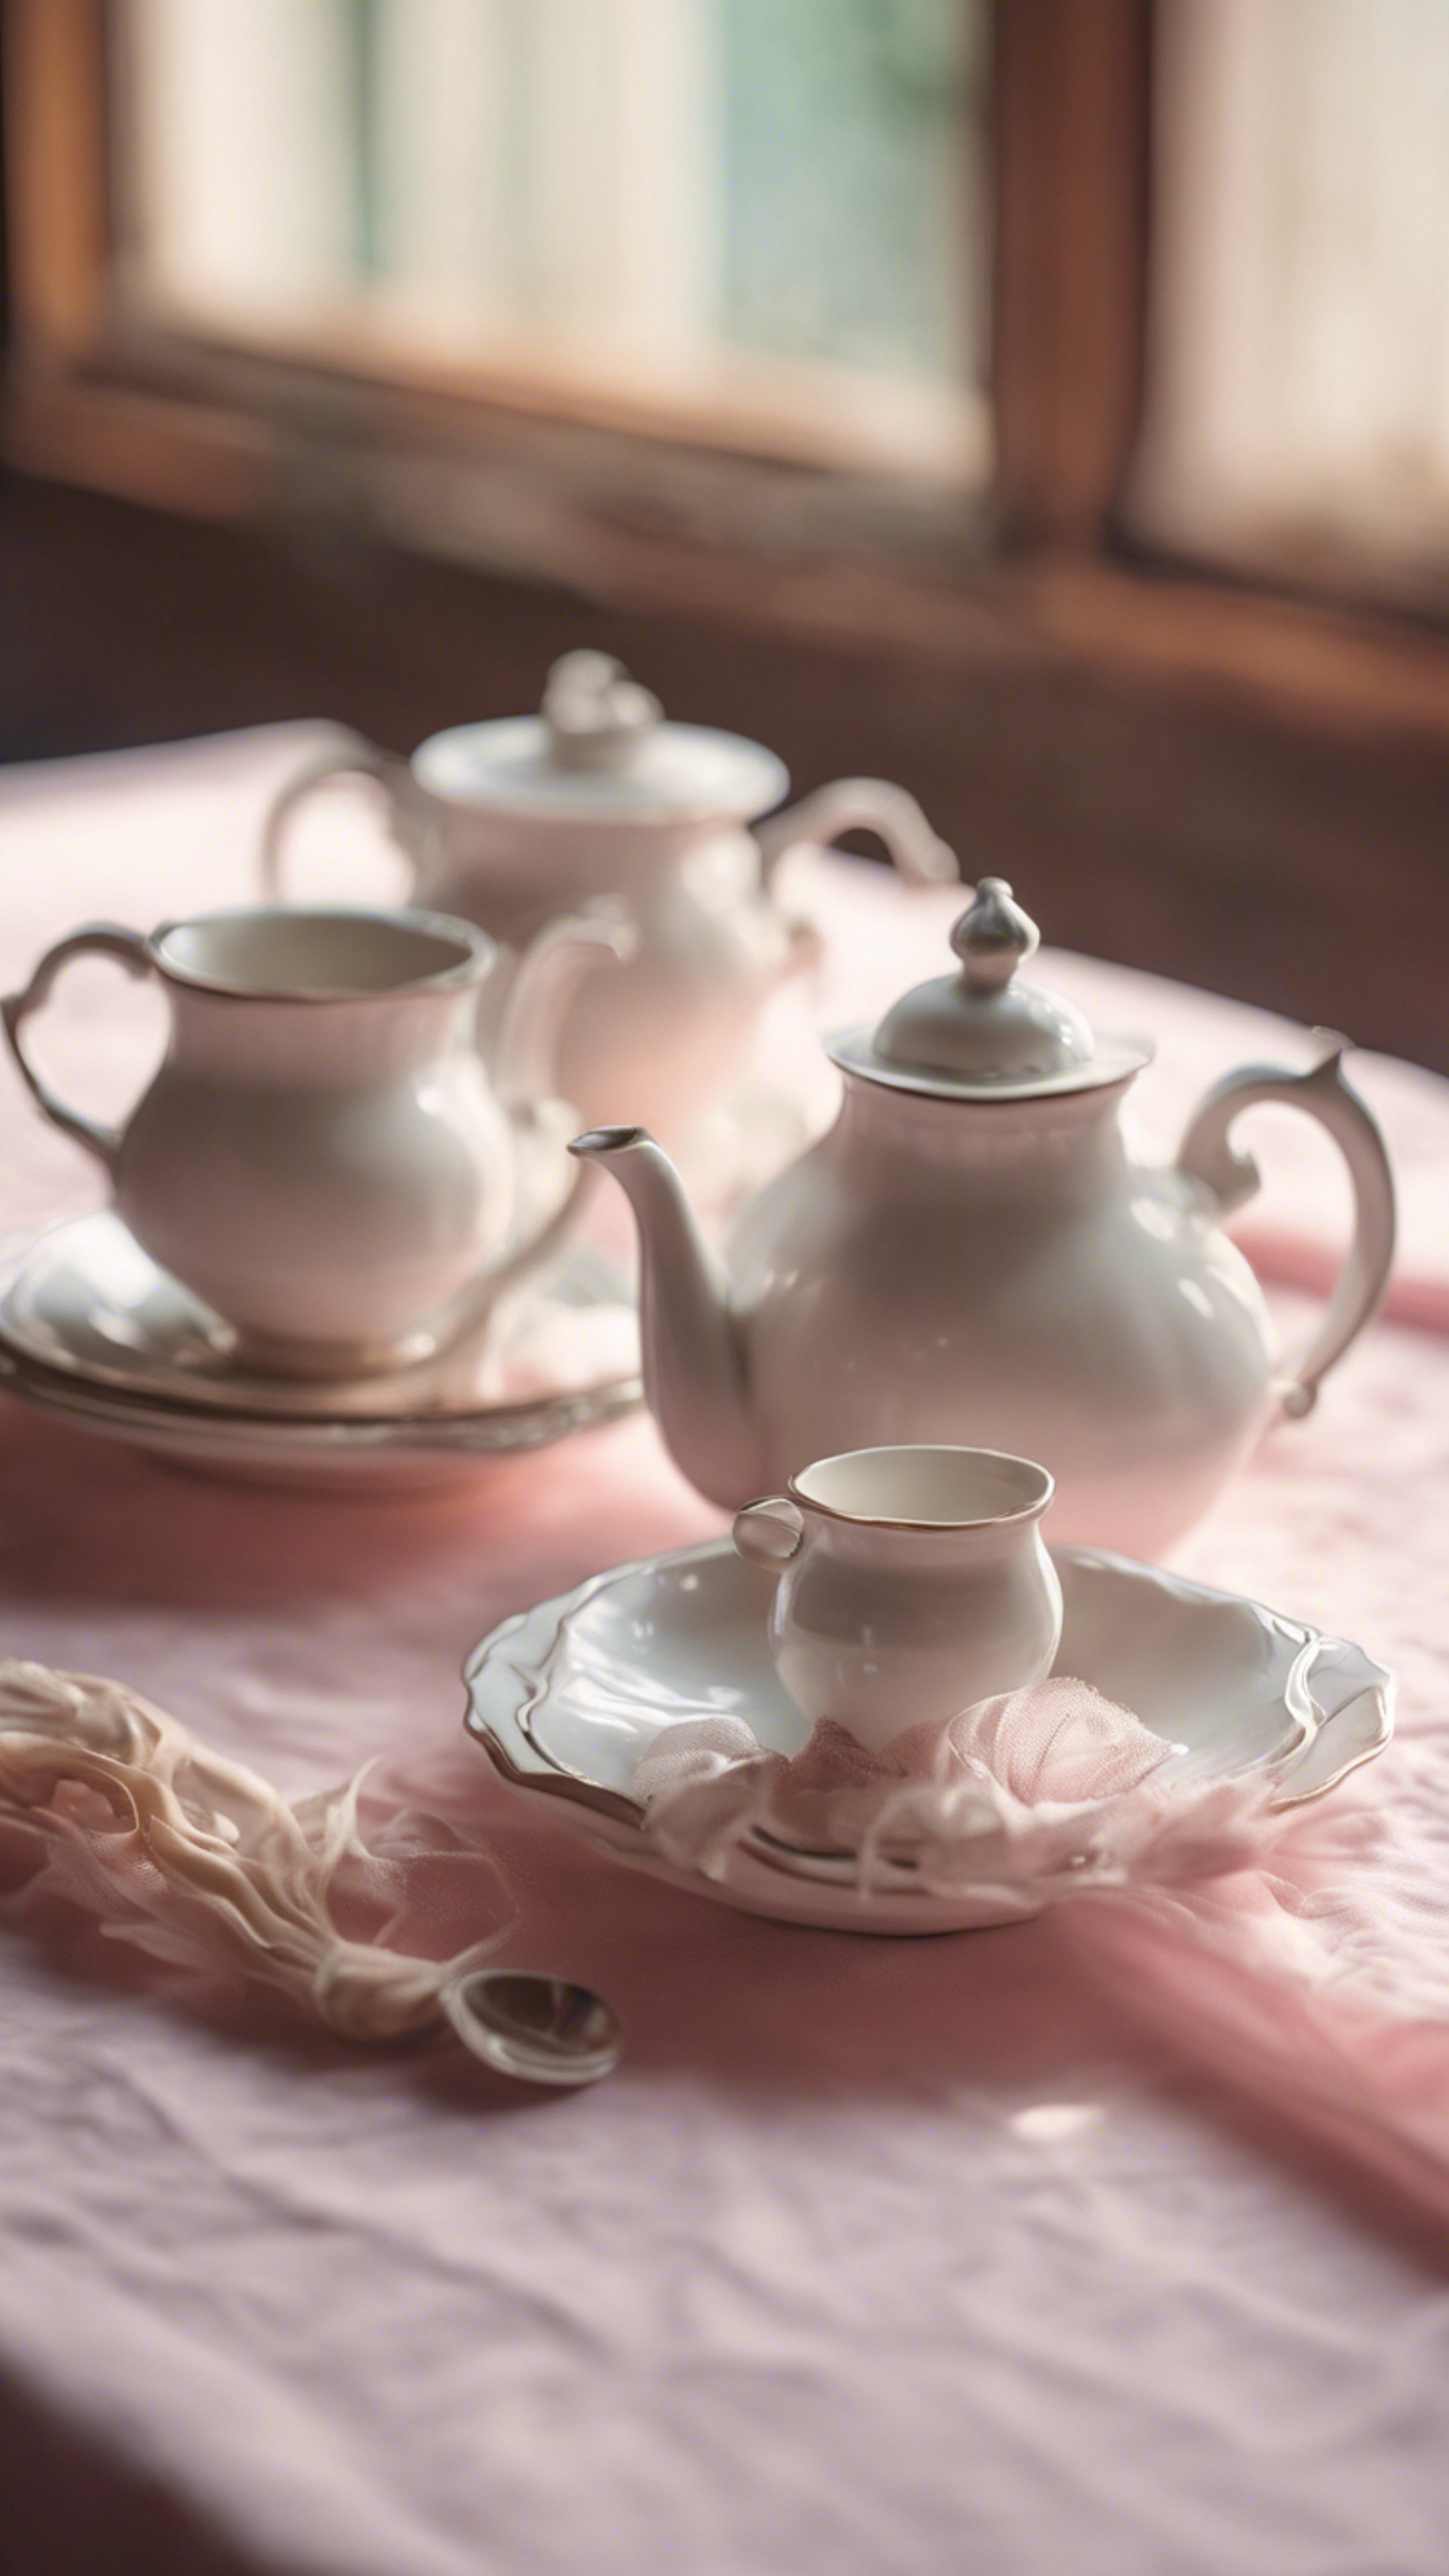 A vintage white tea set, arranged on a fluffy pastel pink tablecloth in a charming, old-world kitchen. 墙纸[519305883ddb44018966]